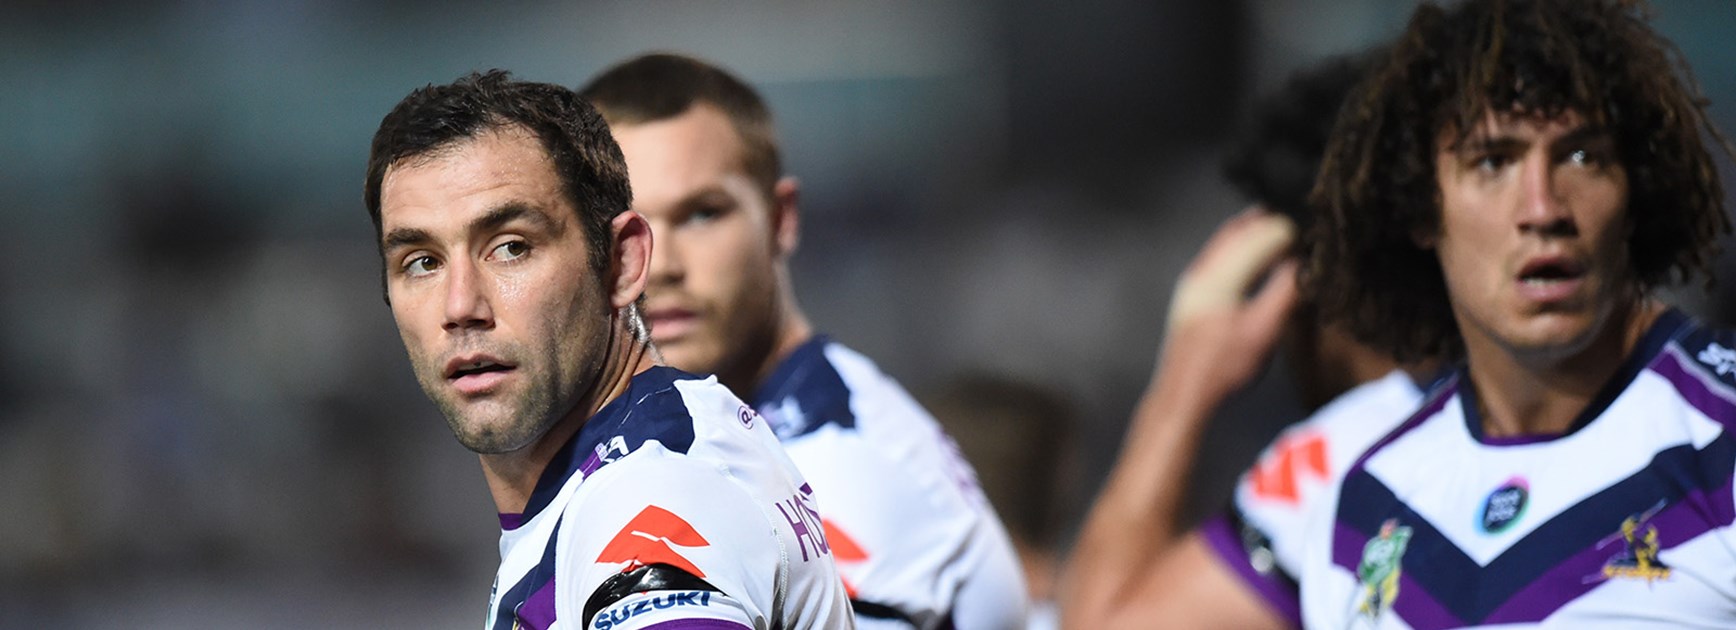 Cameron Smith during the Storm's clash with the Cowboys in Round 21.